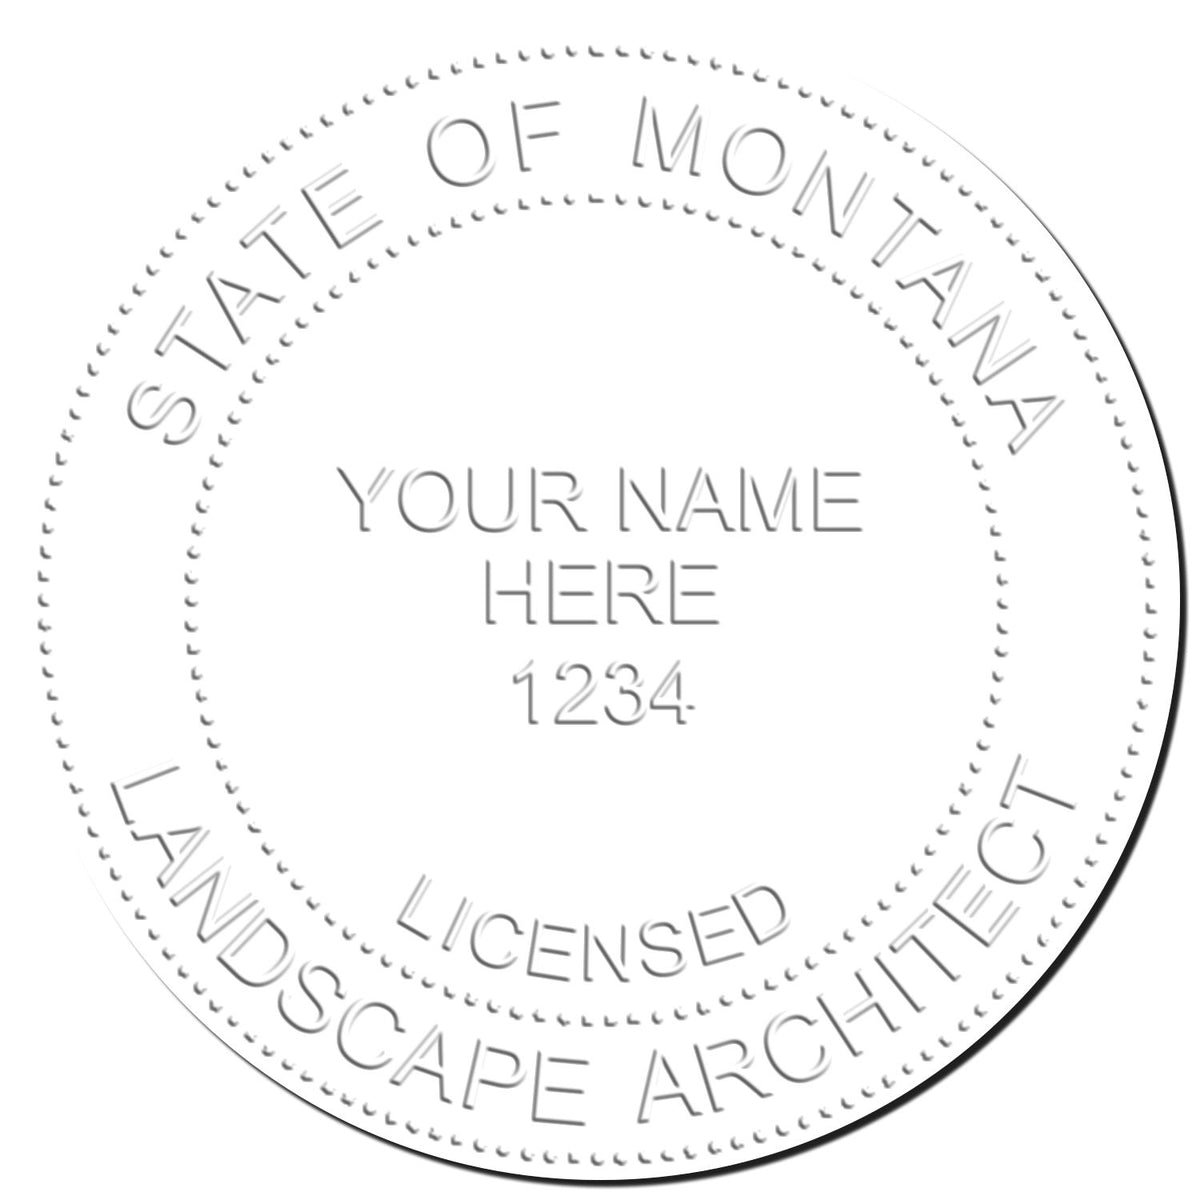 This paper is stamped with a sample imprint of the Soft Pocket Montana Landscape Architect Embosser, signifying its quality and reliability.